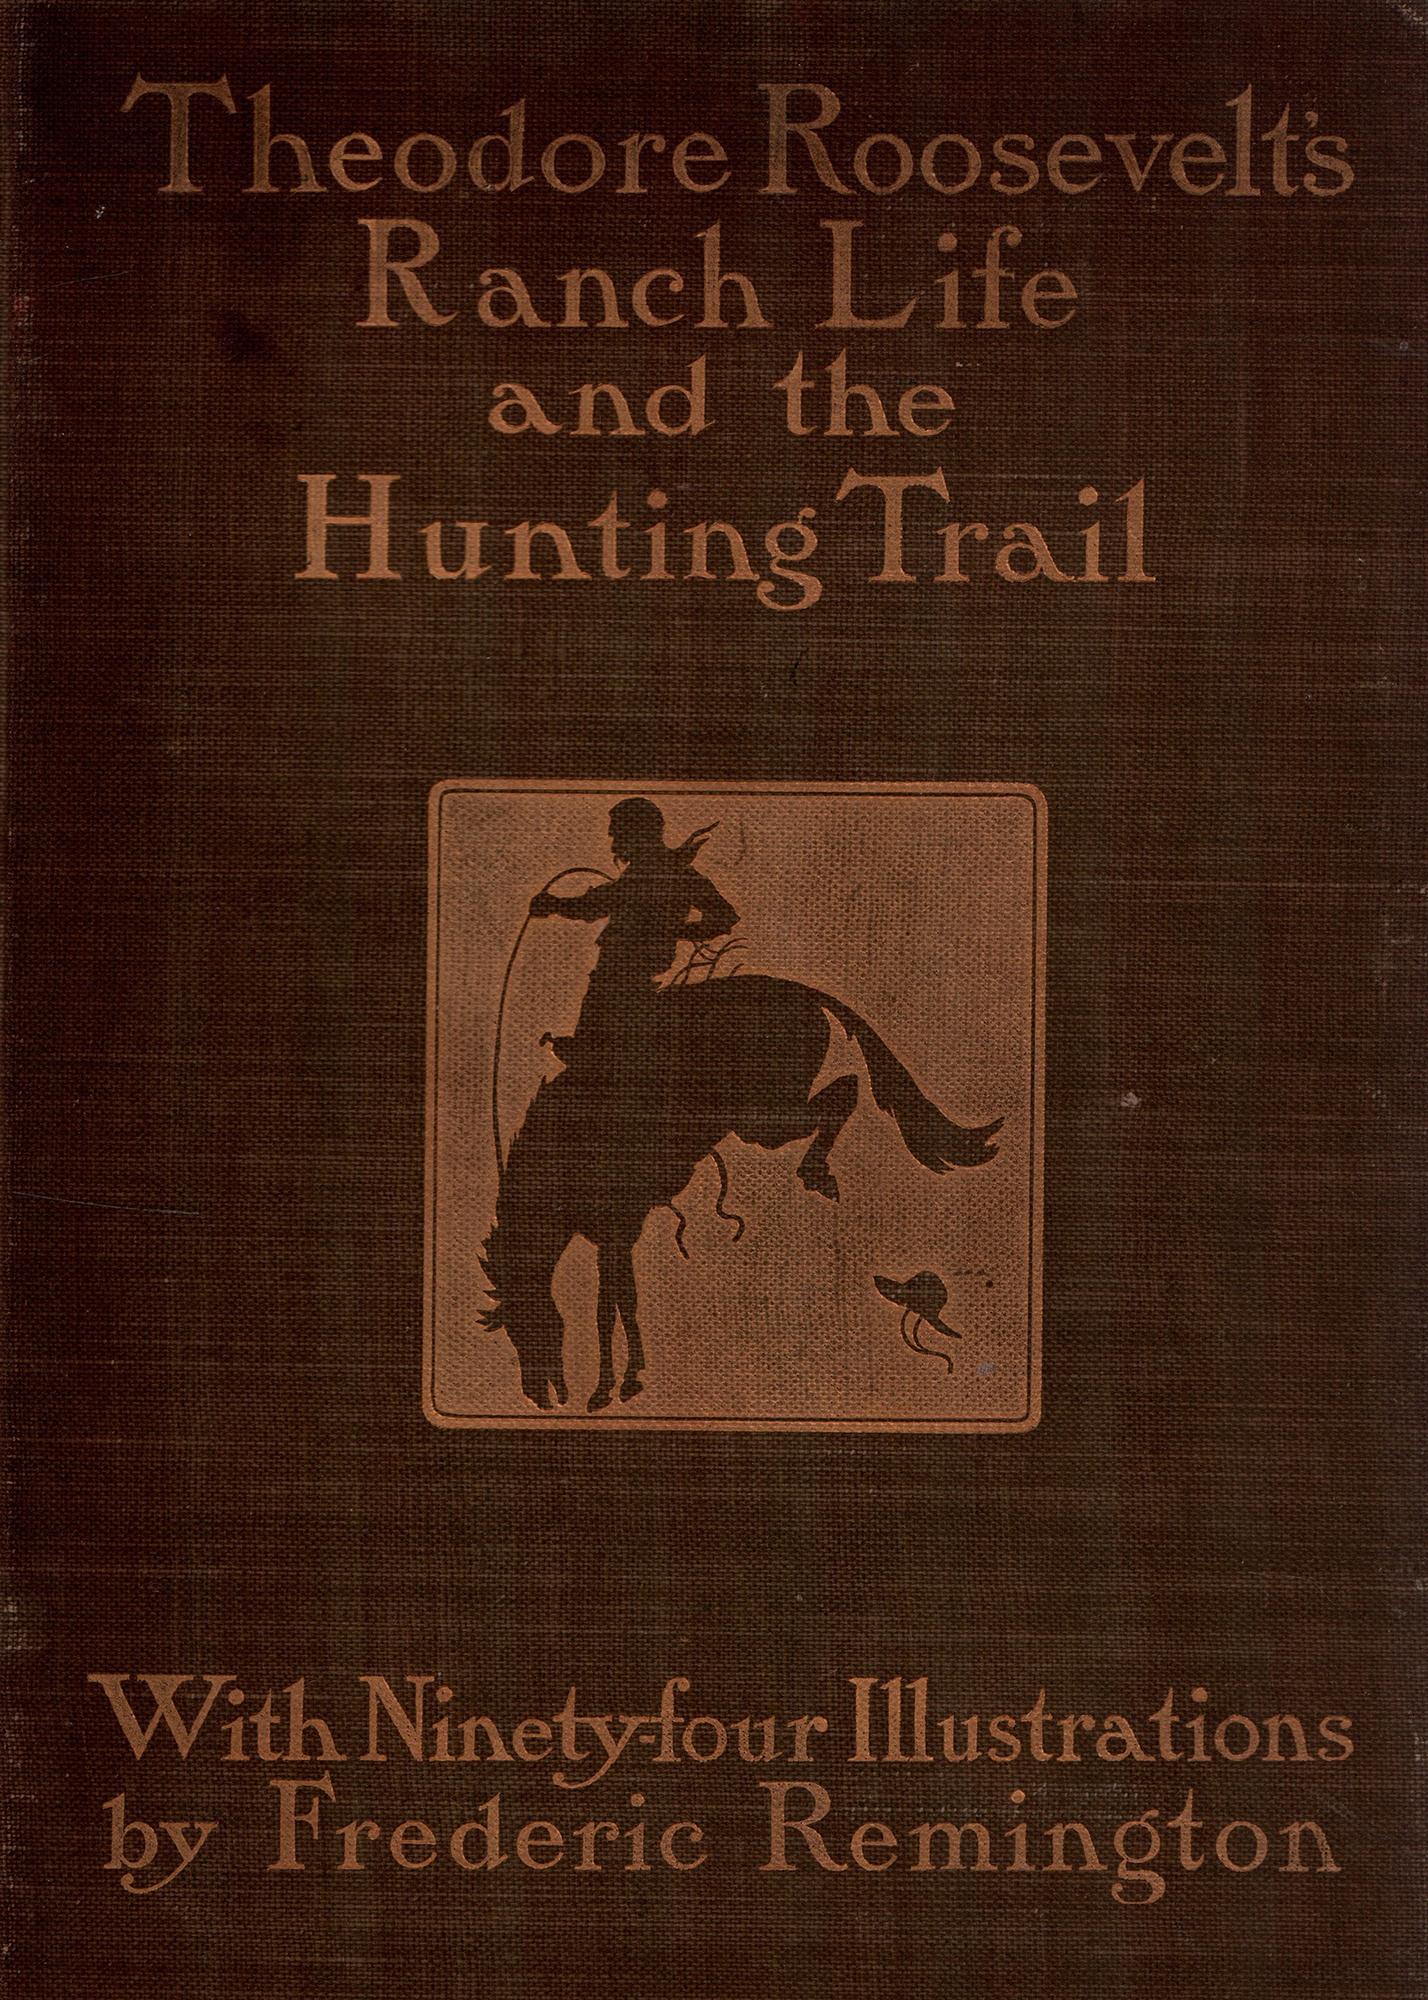 Roosevelt's Ranch Life and the Hunting Trail, Illustrated by Frederic Remington  1